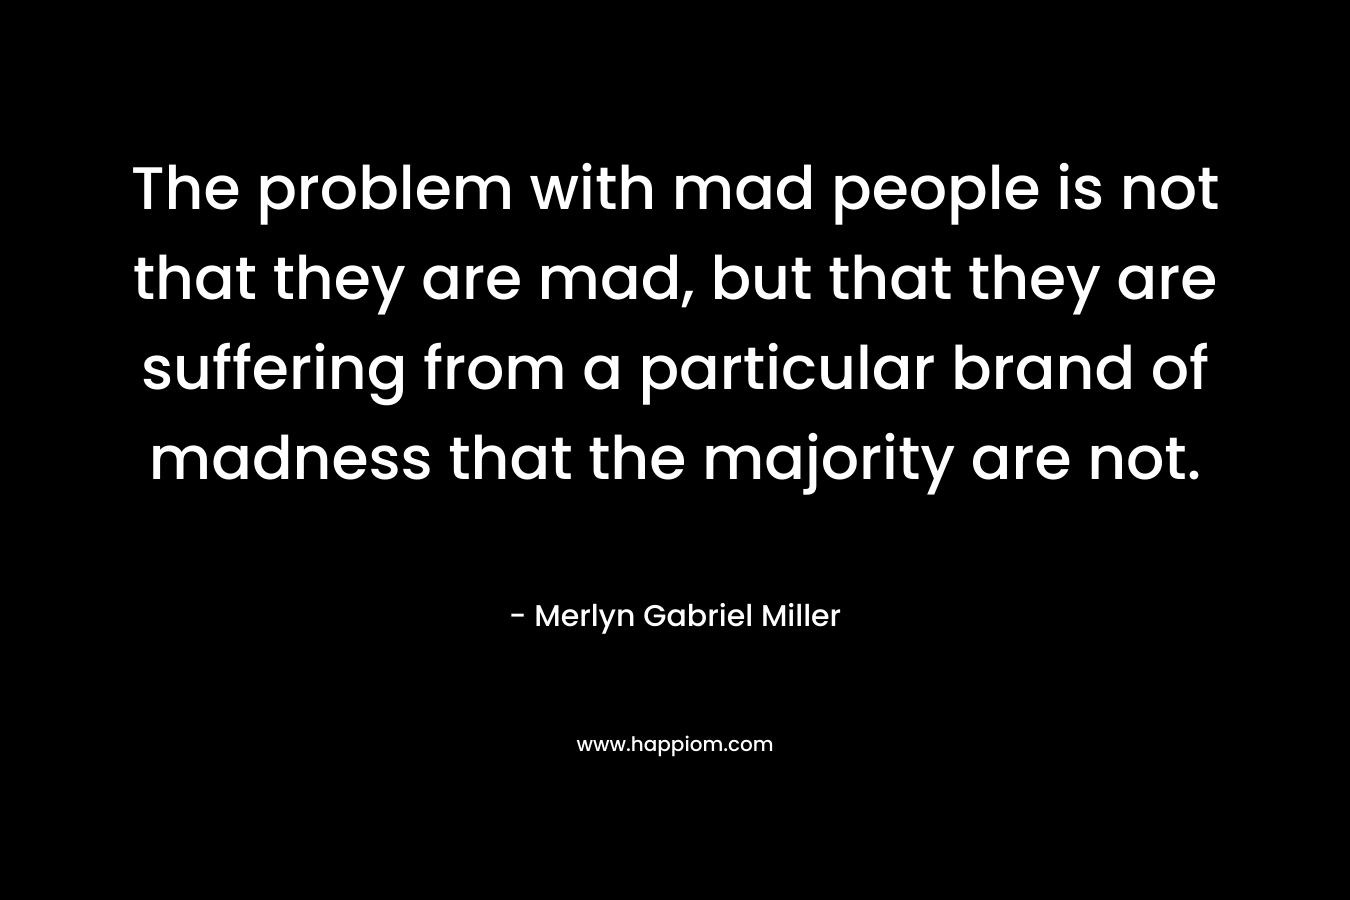 The problem with mad people is not that they are mad, but that they are suffering from a particular brand of madness that the majority are not.